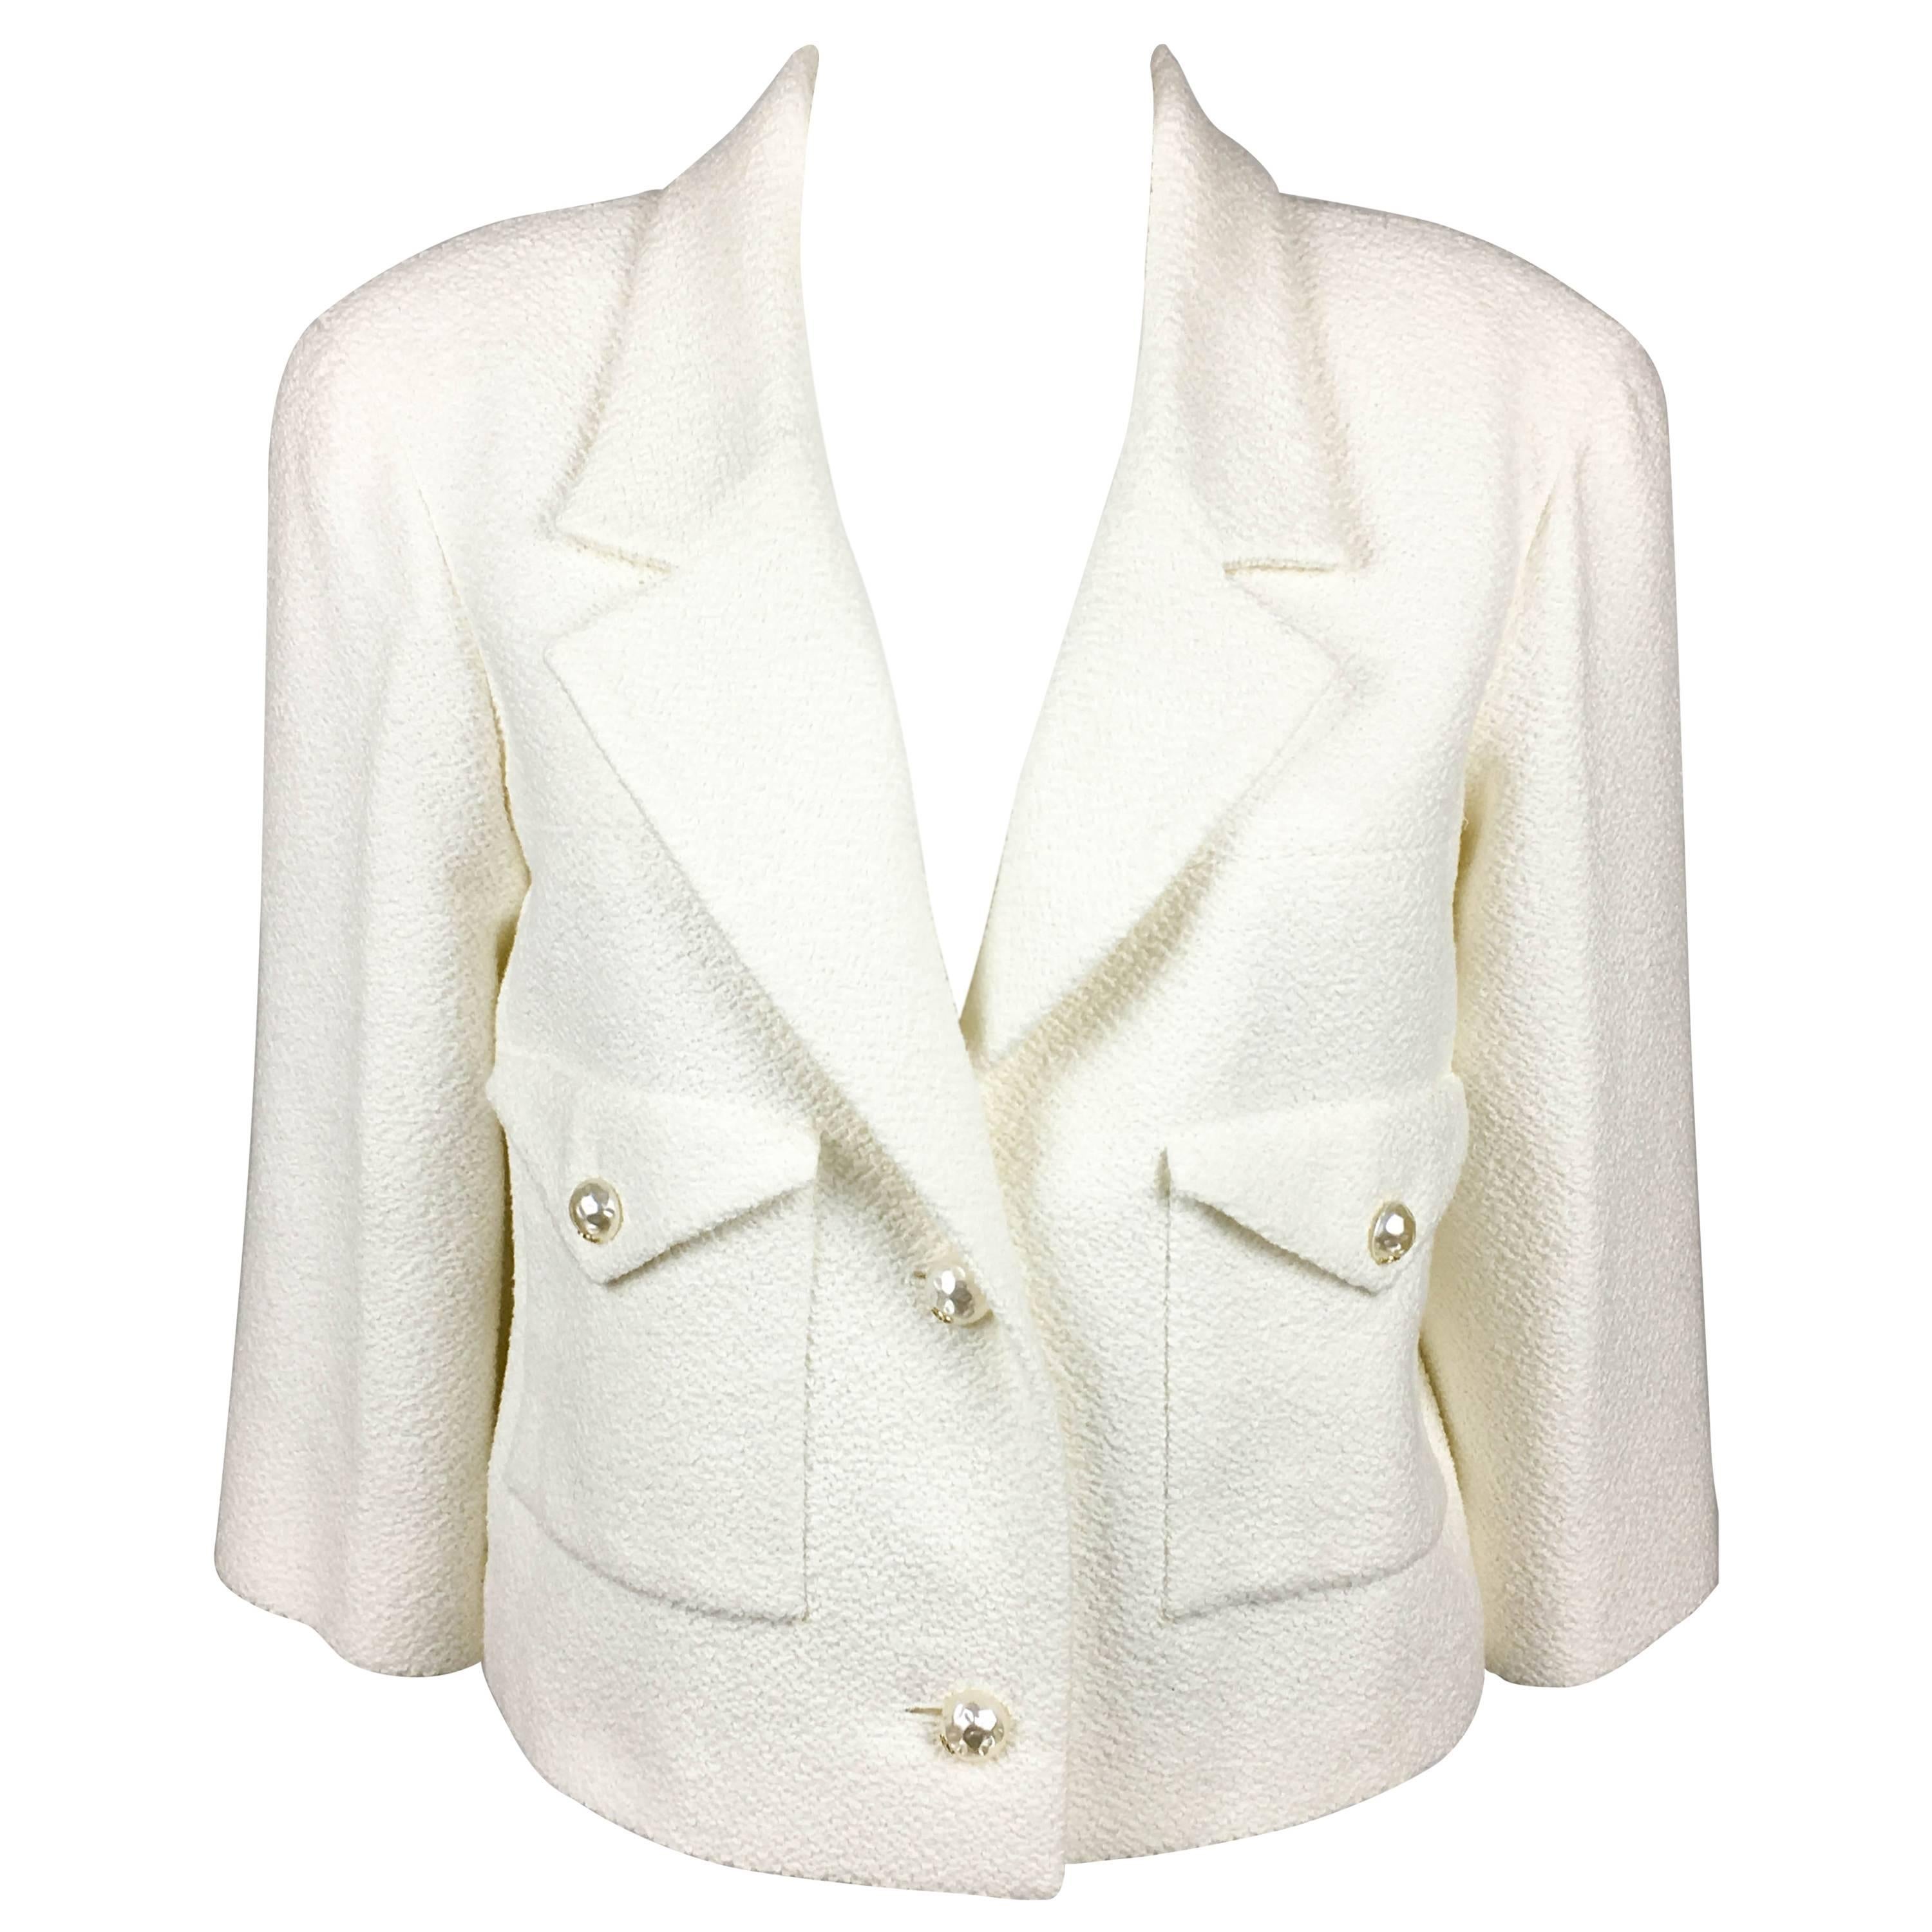 2012 Chanel Runway Look White Cotton Jacket With Faux-Pearl Buttons